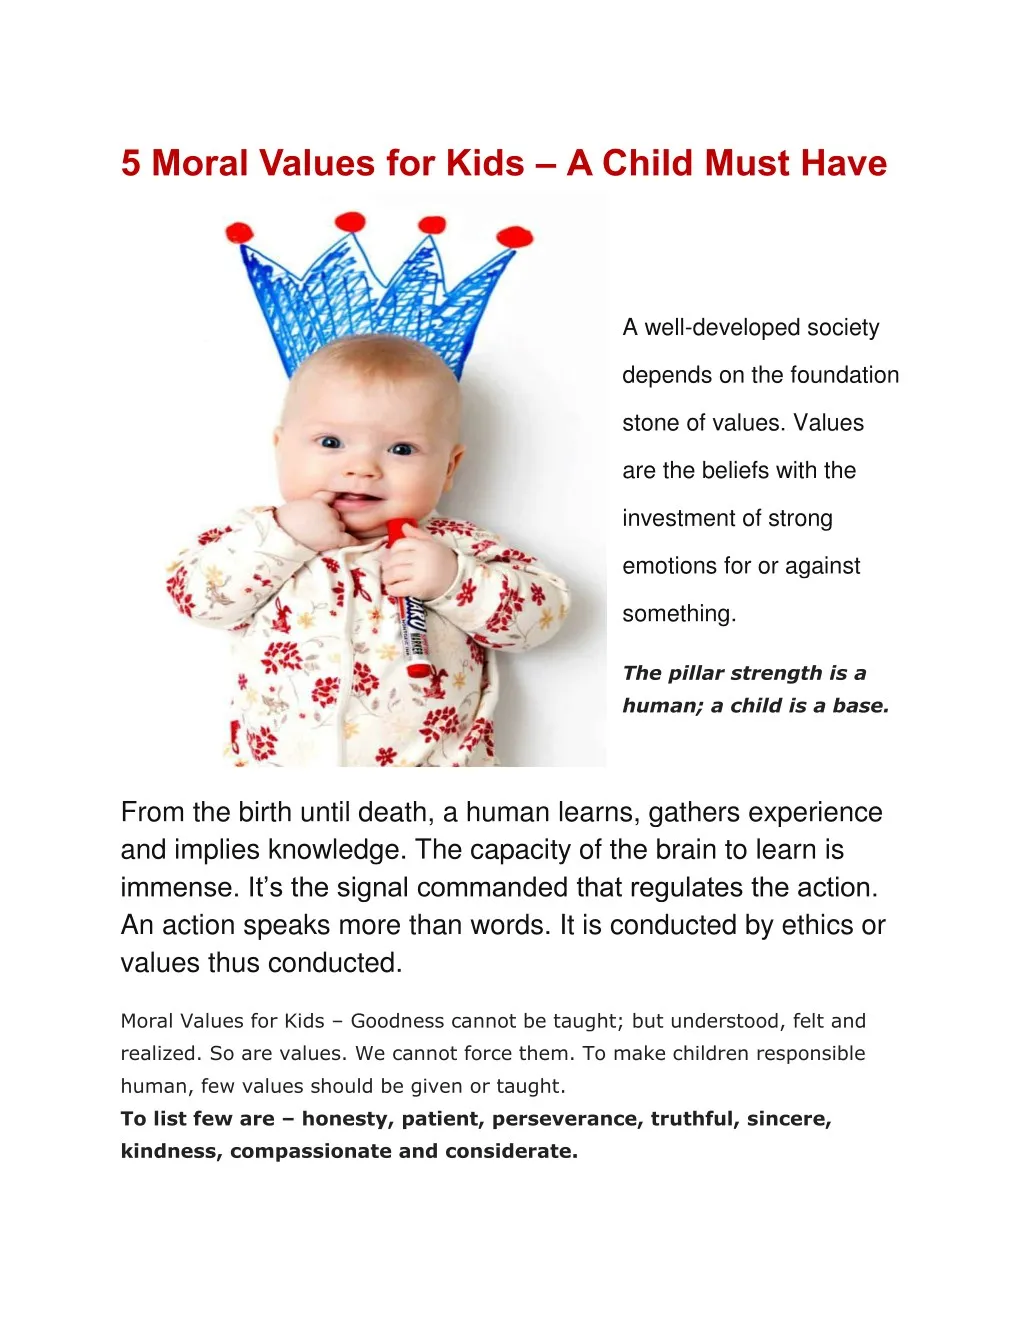 5 moral values for kids a child must have